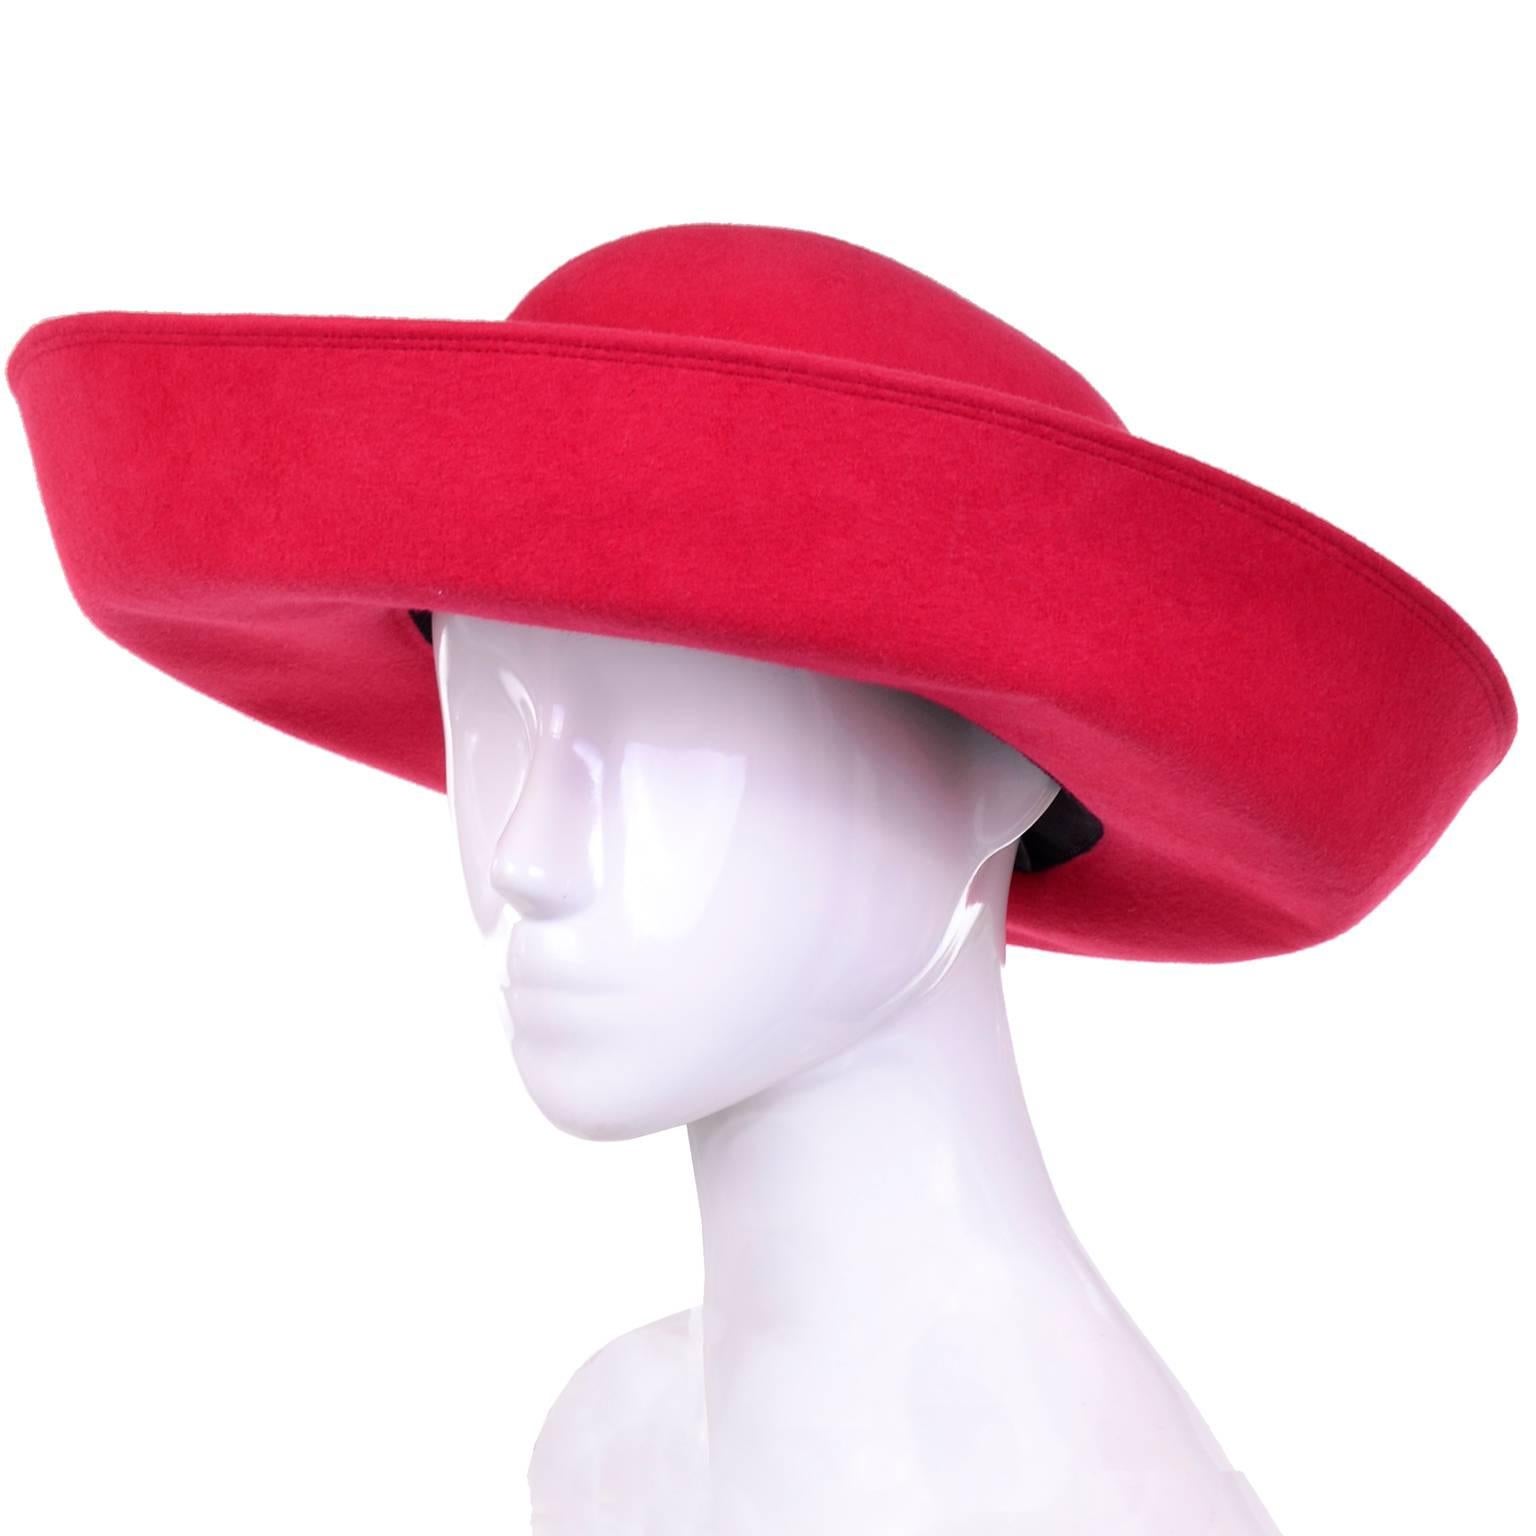 This is a vintage Patricia Underwood wide brim scarlet red wool hat that was never worn and still has its original Bergdorf Goodman tag attached. The hat measures  21